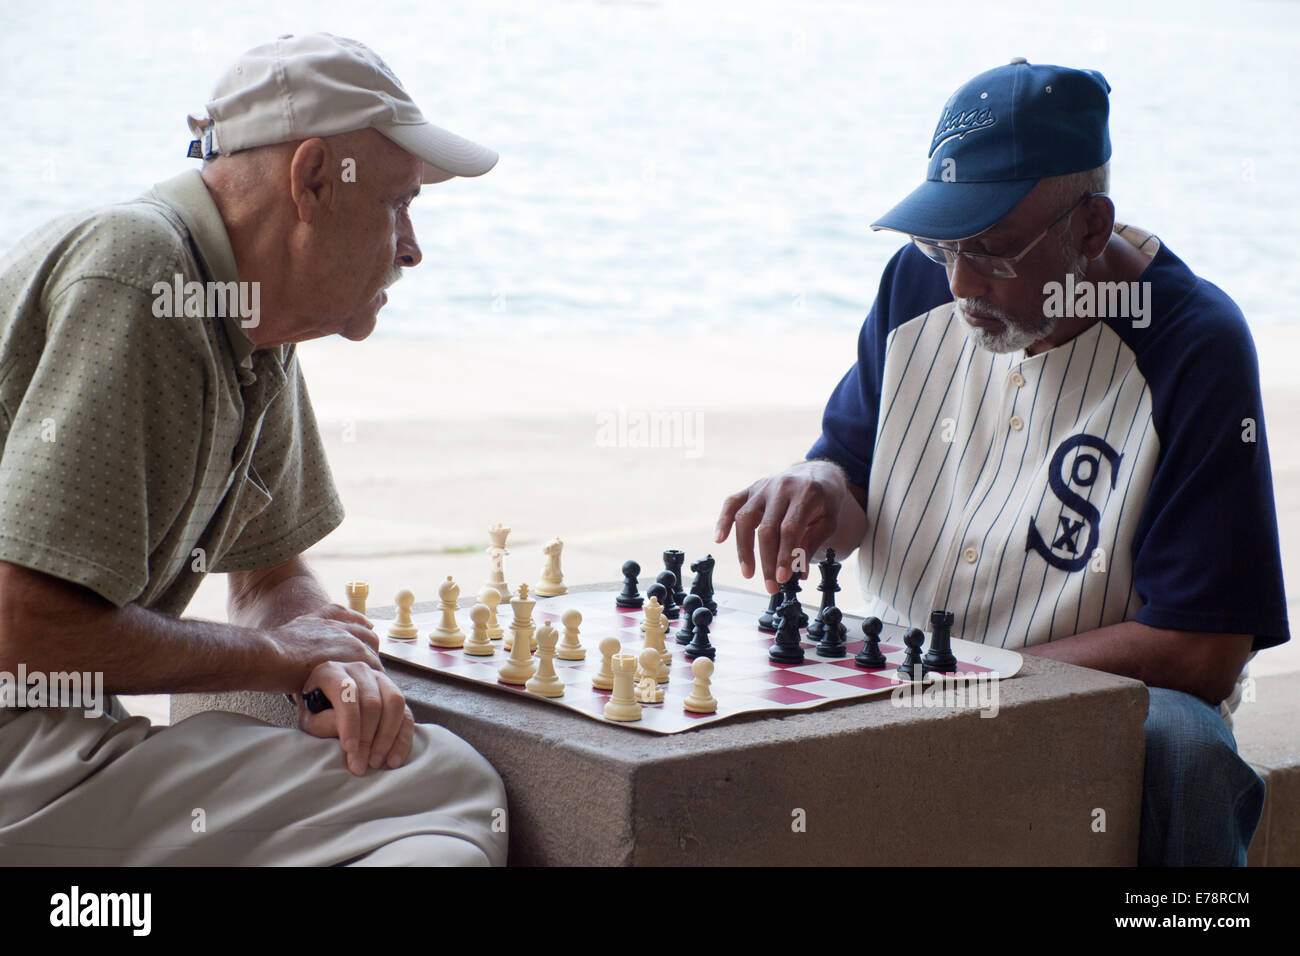 Two retired gentlemen enjoy a game of chess at the North Avenue Beach Chess Pavilion in Chicago, Illinois. Stock Photo